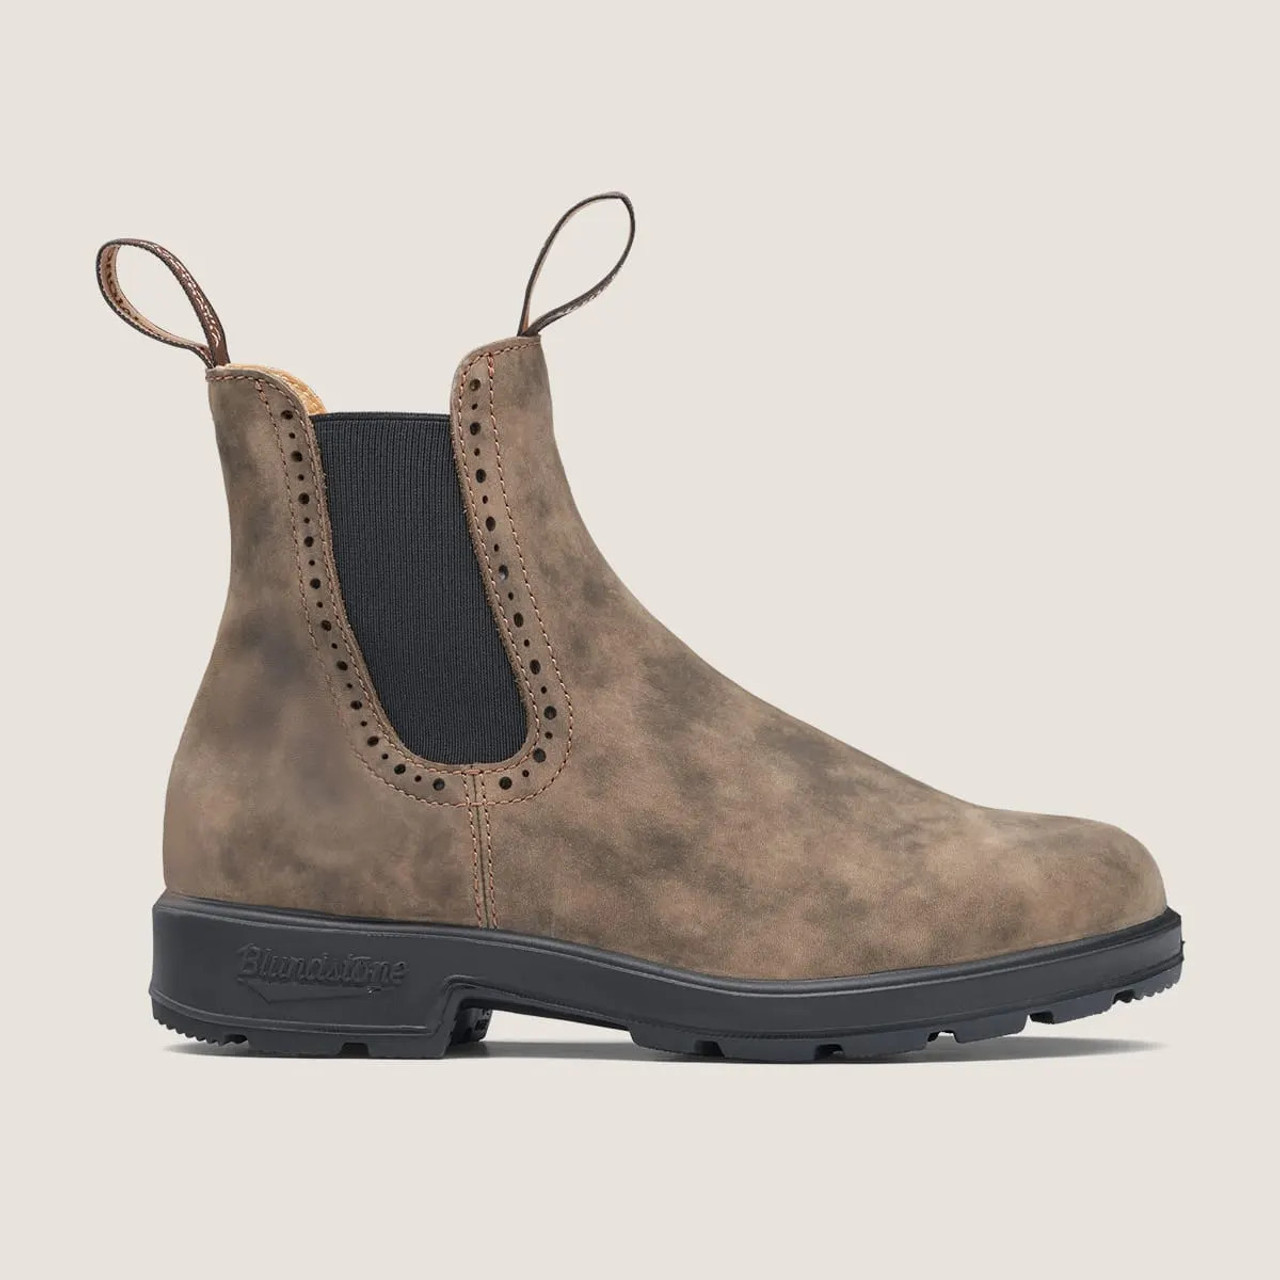 Afslag Booth Rummelig Blundstone Women's Classic Chelsea Boots 1351 - Rustic Brown - Backcountry  & Beyond